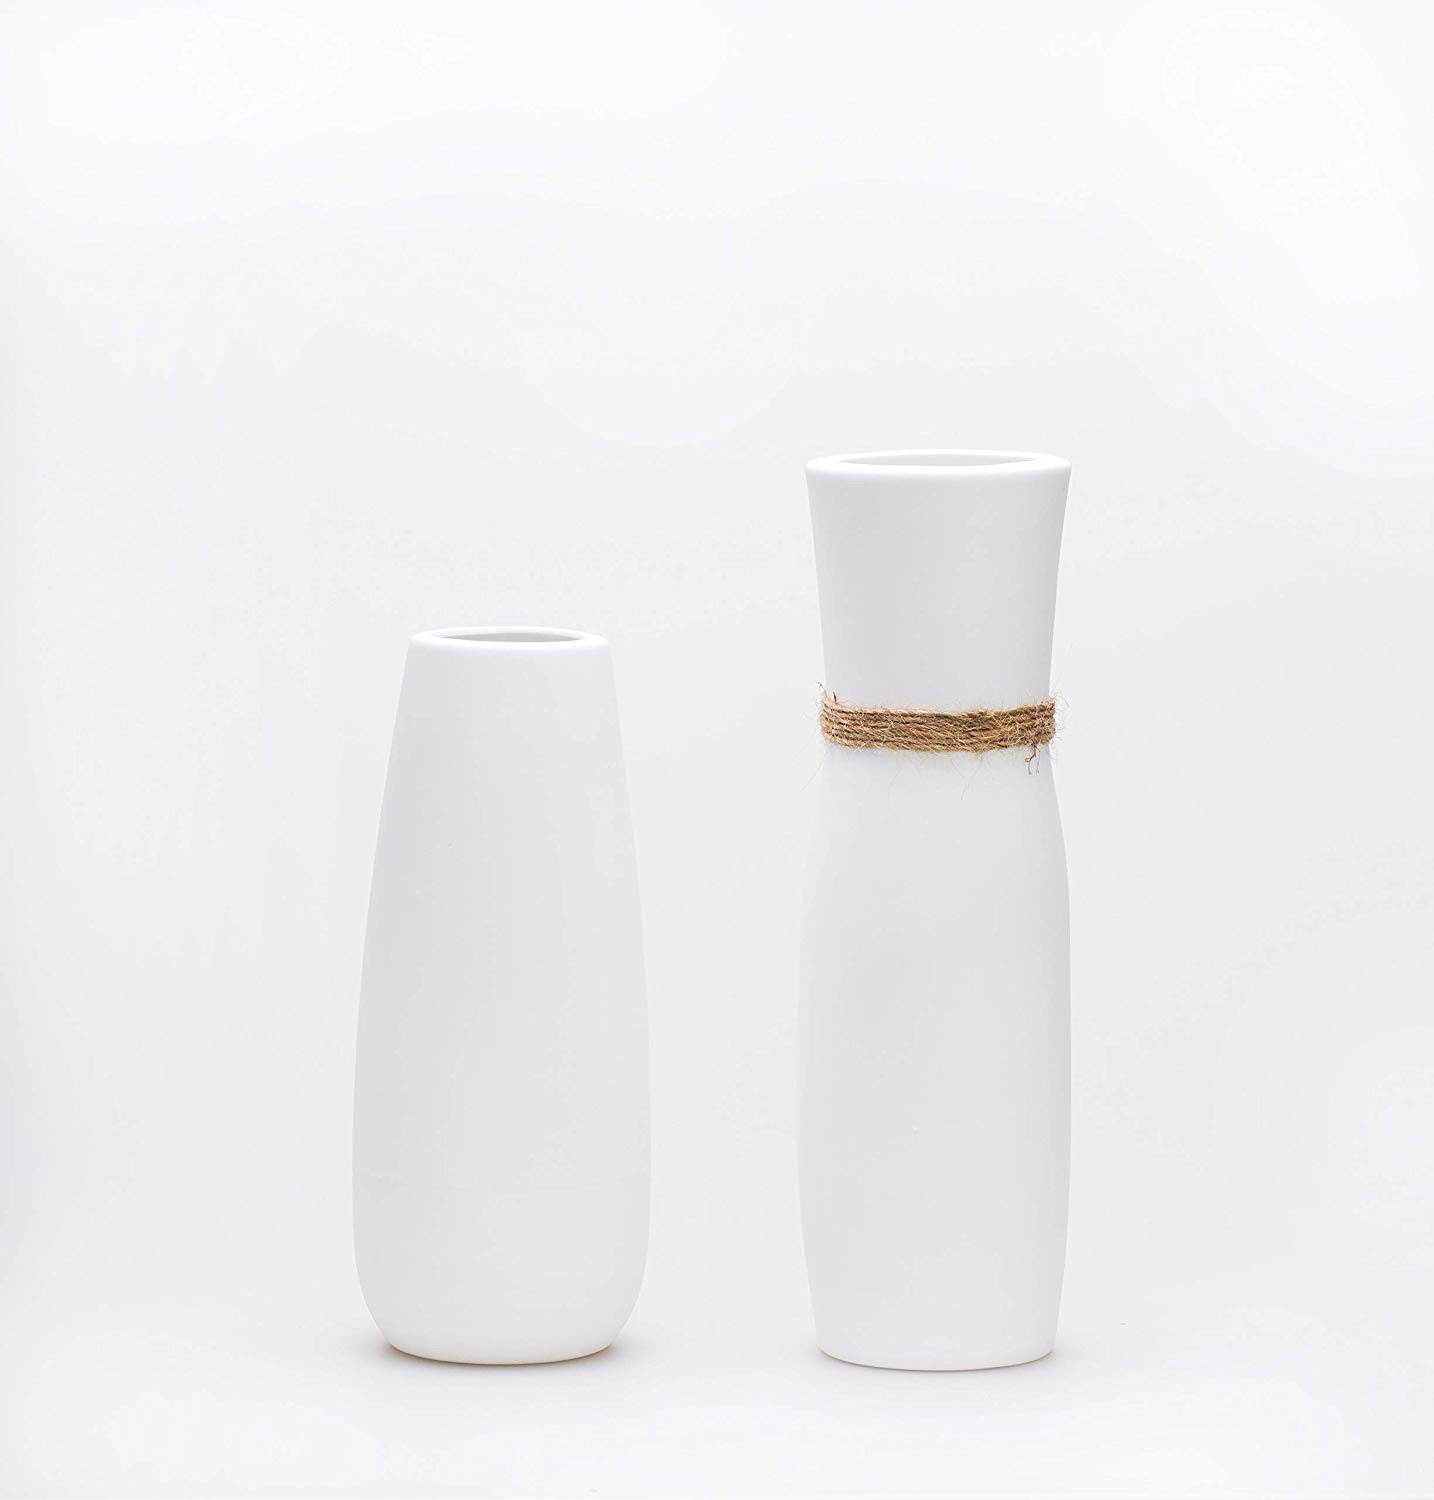 24 Fashionable tobacco Leaf Vase 2024 free download tobacco leaf vase of amazon com opps white ceramic vases with differing unique rope throughout amazon com opps white ceramic vases with differing unique rope design for home dacor set of 2 h